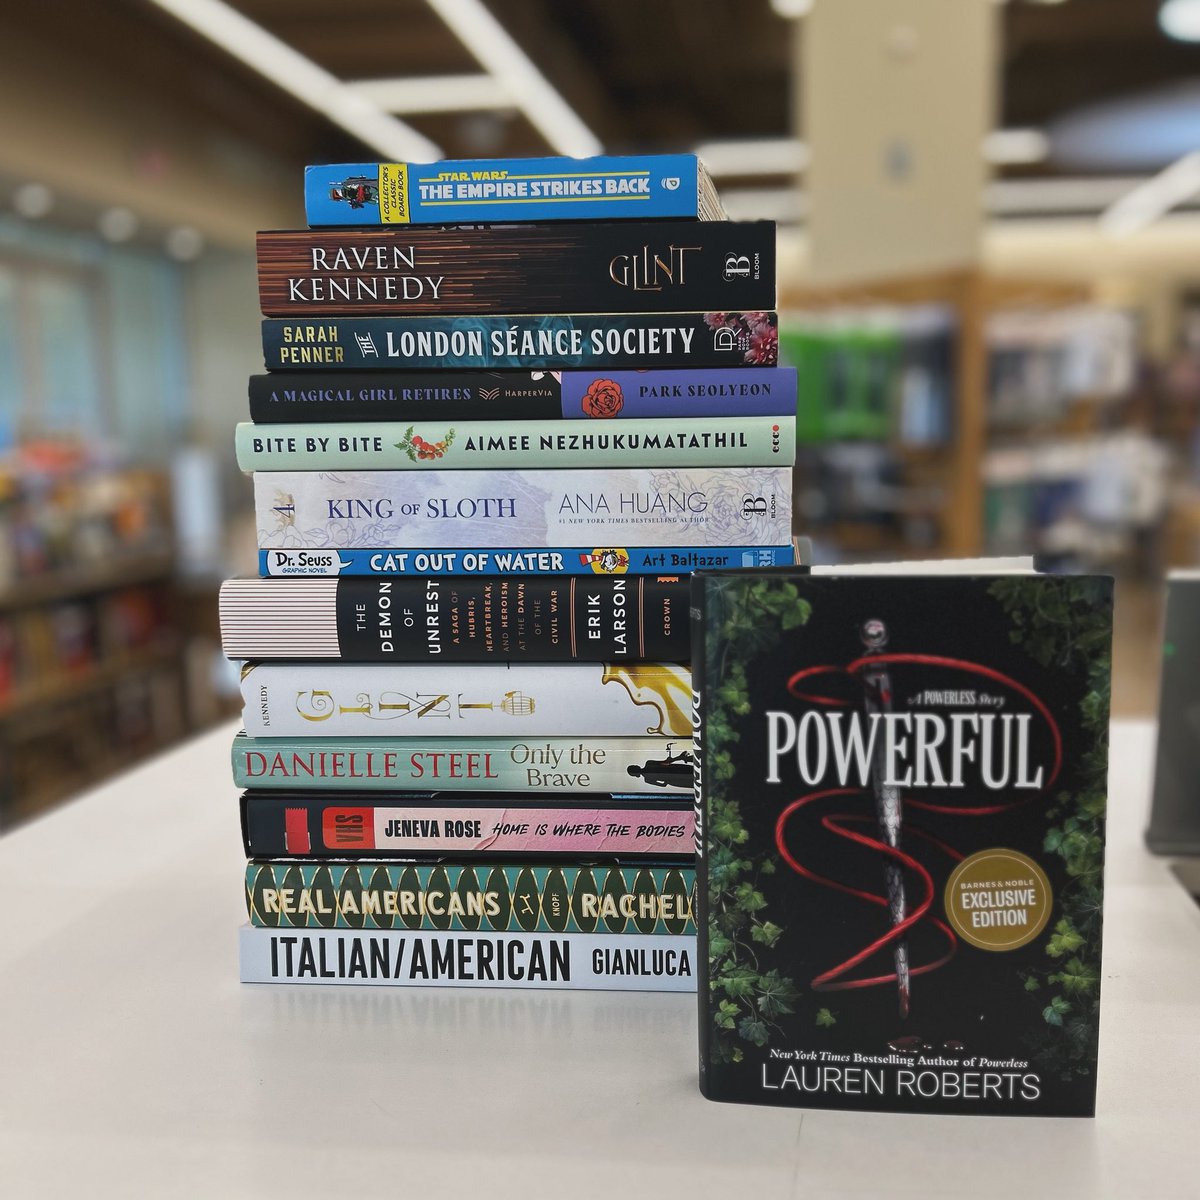 Happy #newreleasetuesday 📚!! We can’t wait to welcome you back to our store. See you on May 29th!

#mybn #bnbuzz #sandyutah #saltlakecounty #slc #bn236 #bookstagram #bookcommunity #bookish #igreads #igbooks #booknerd #instabooks #booklove #instabook